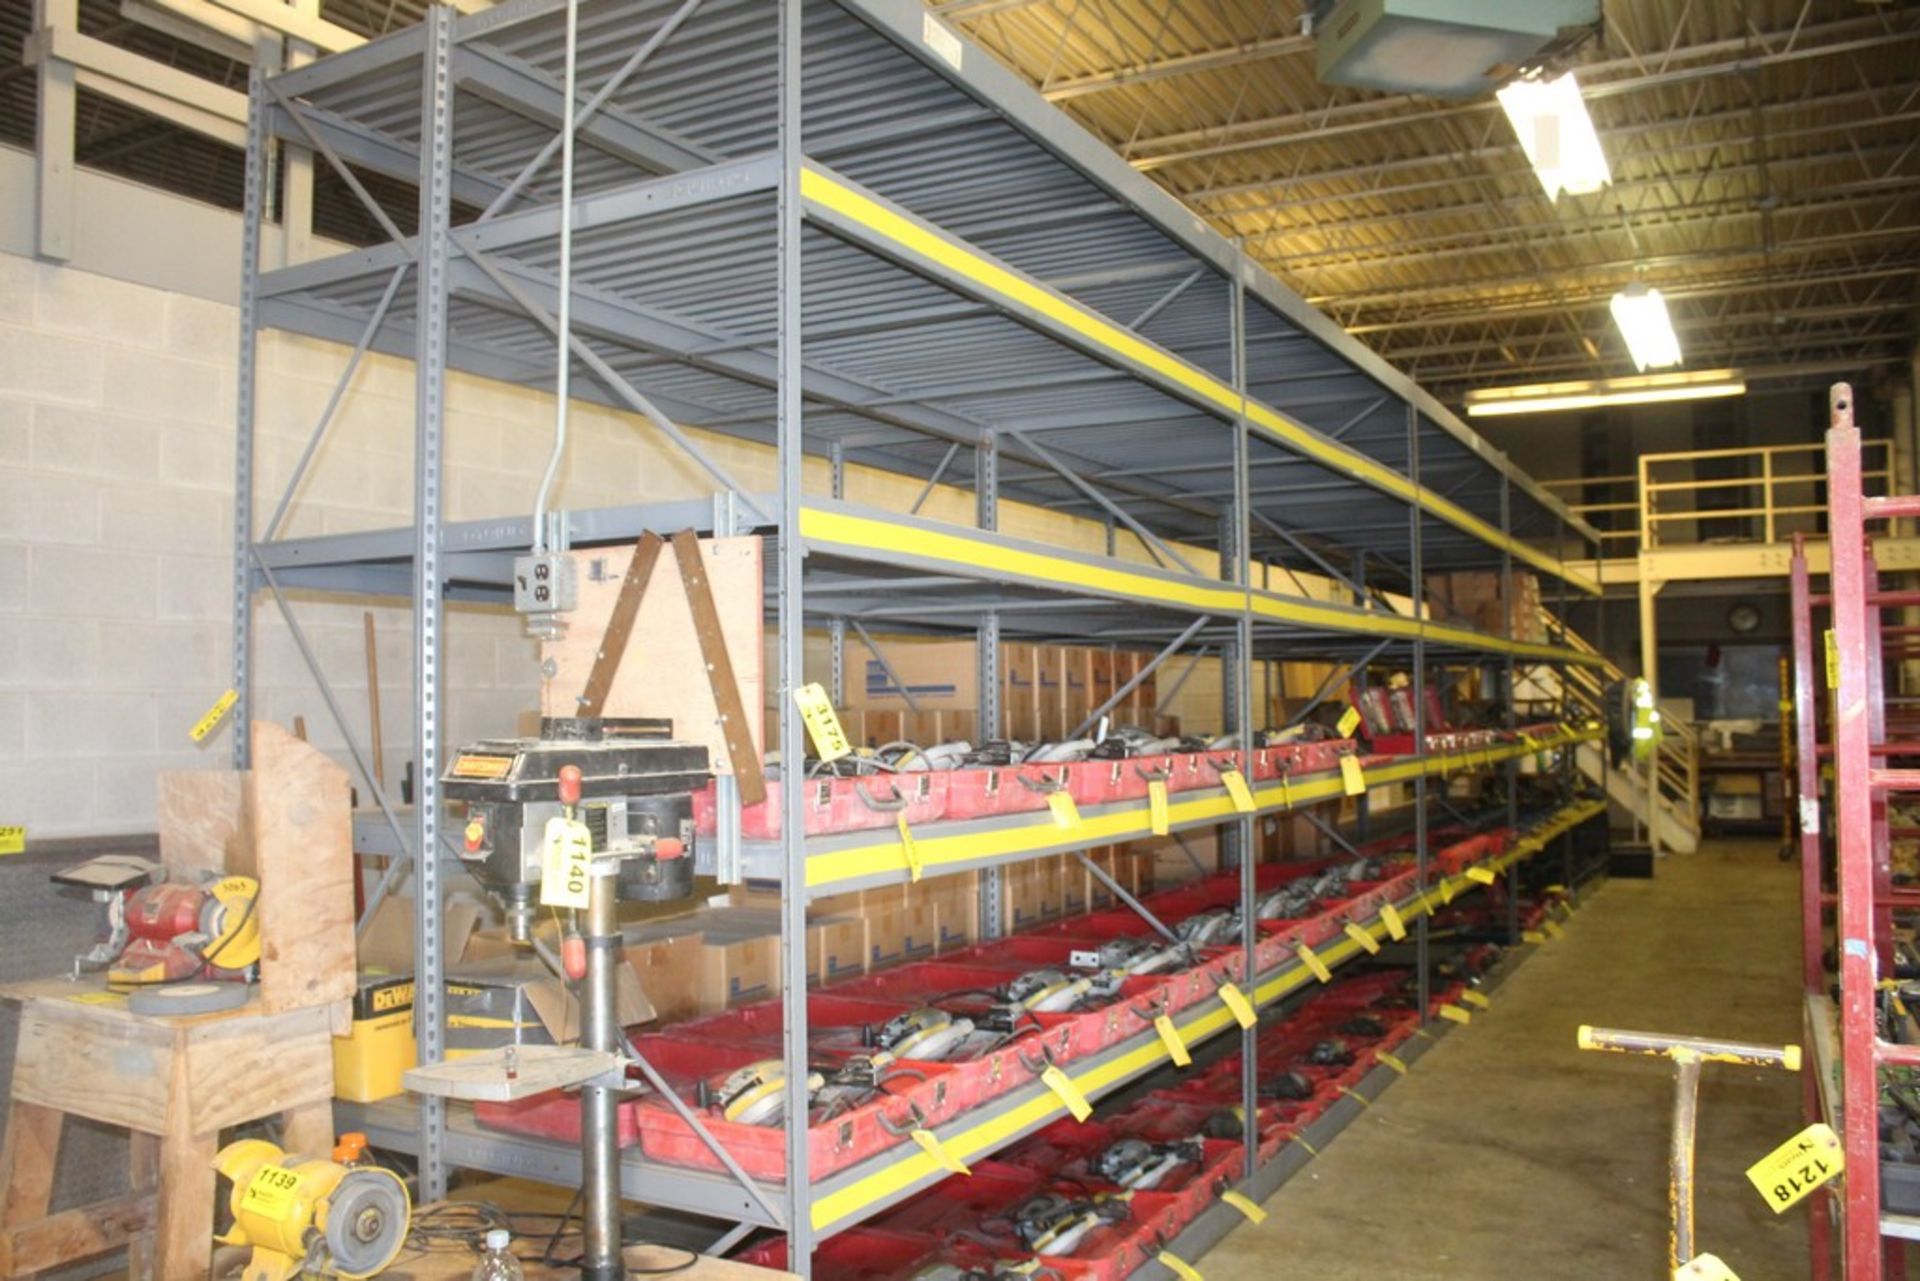 (5) SECTIONS EQUIPTO 8' X 36" X 10' ADJUSTABLE STEEL SHELVING - DELAYED REMOVAL - WILL NOTIFY WHEN